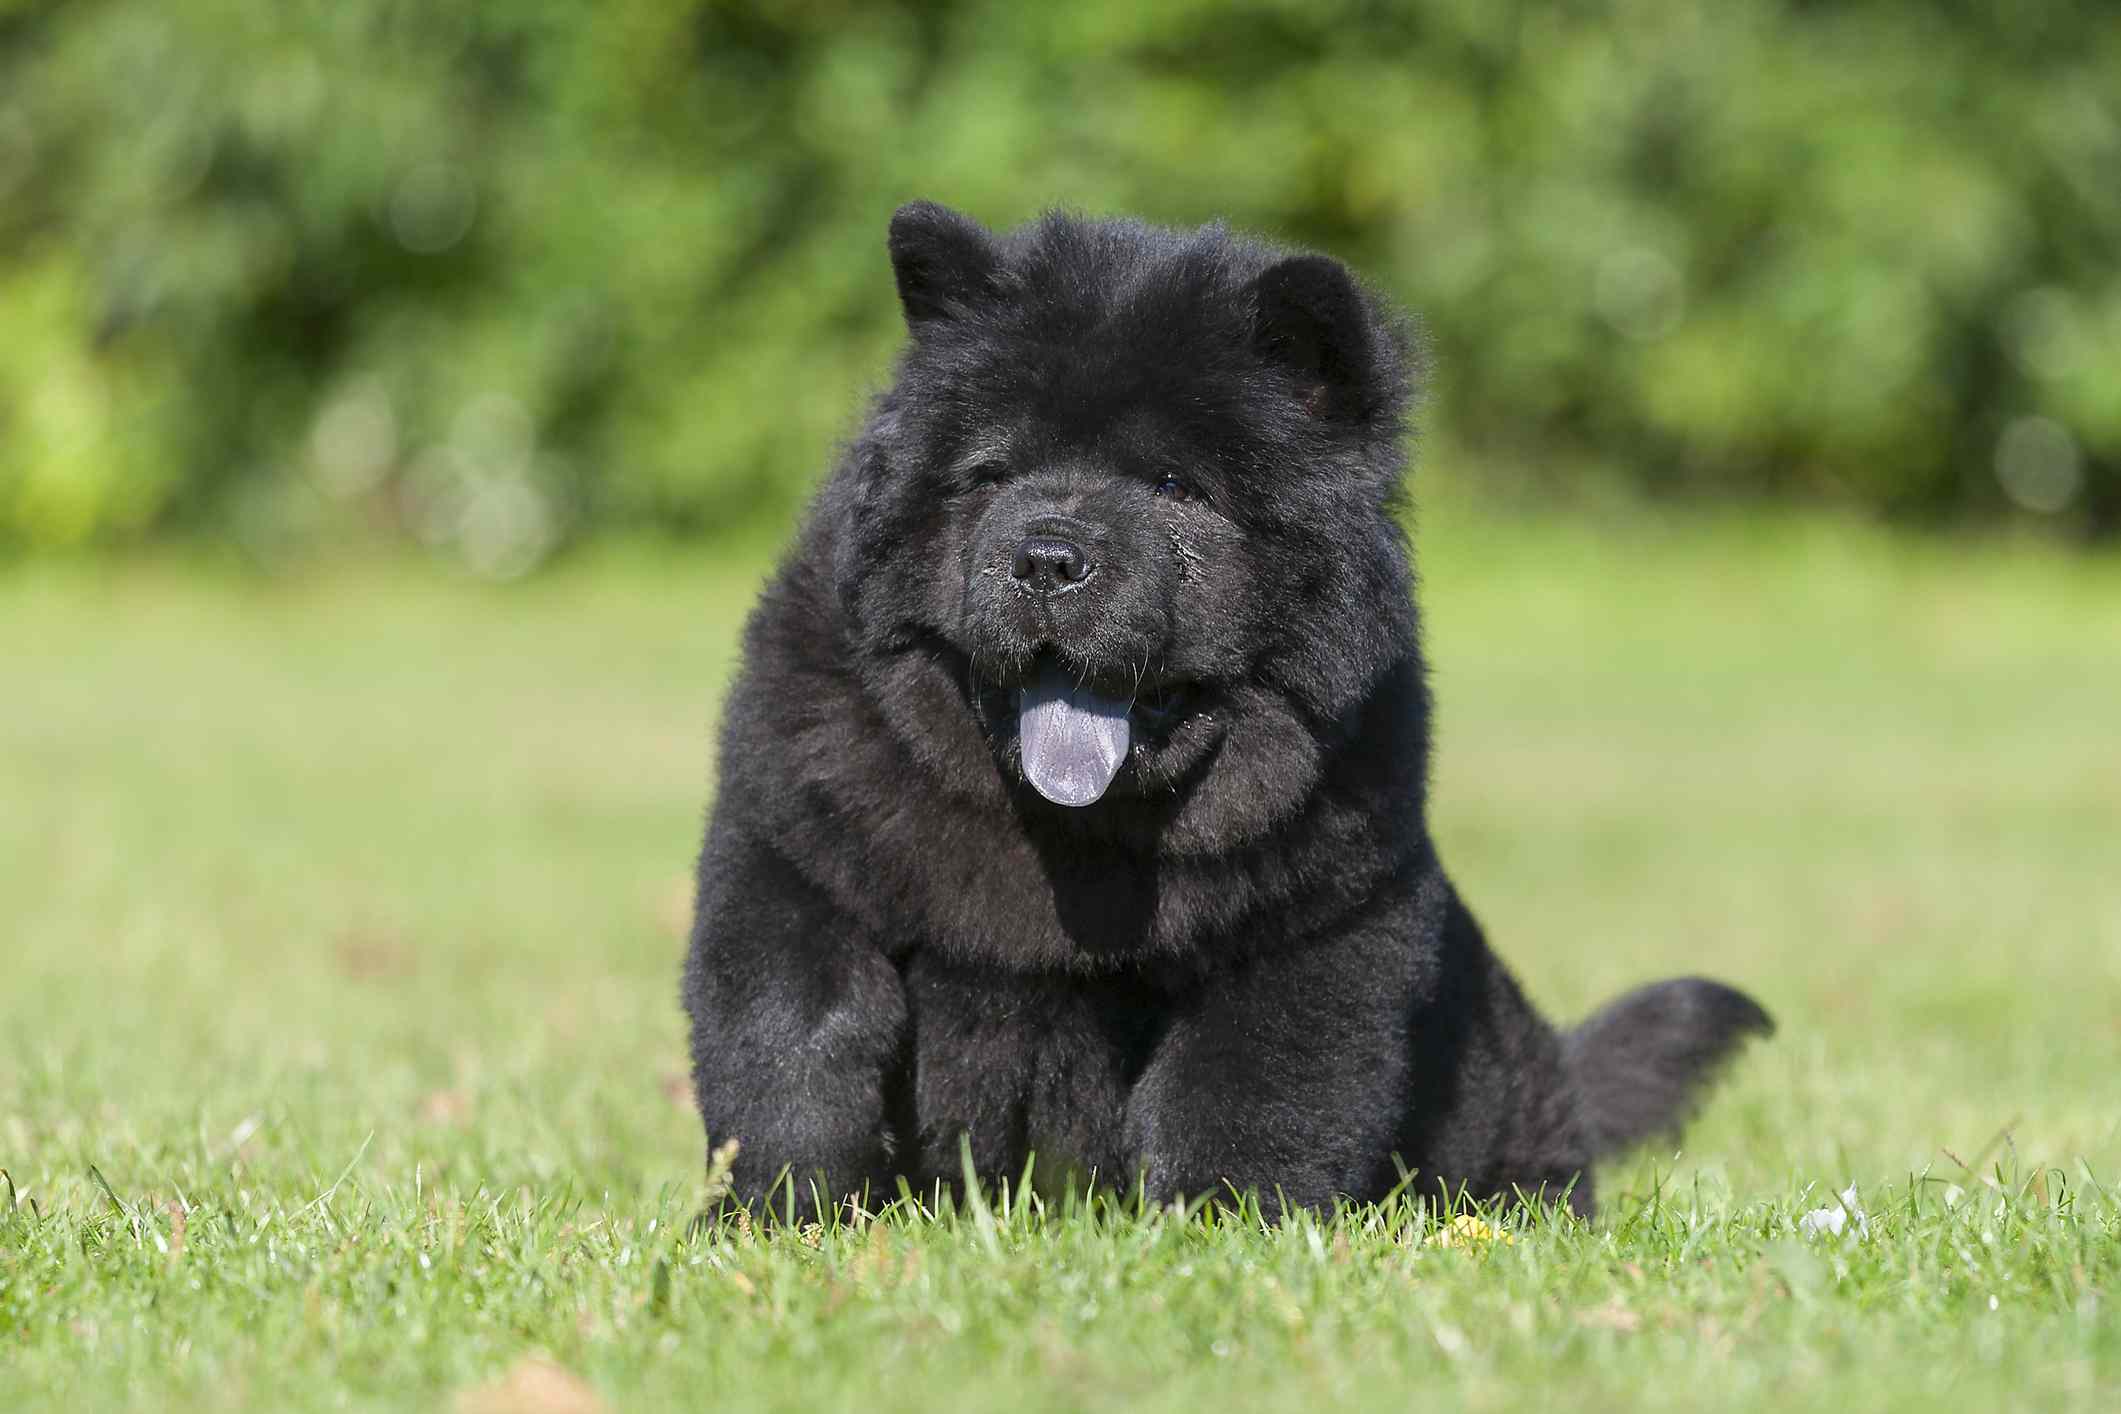 An adult Chow Chow sitting outdoors.